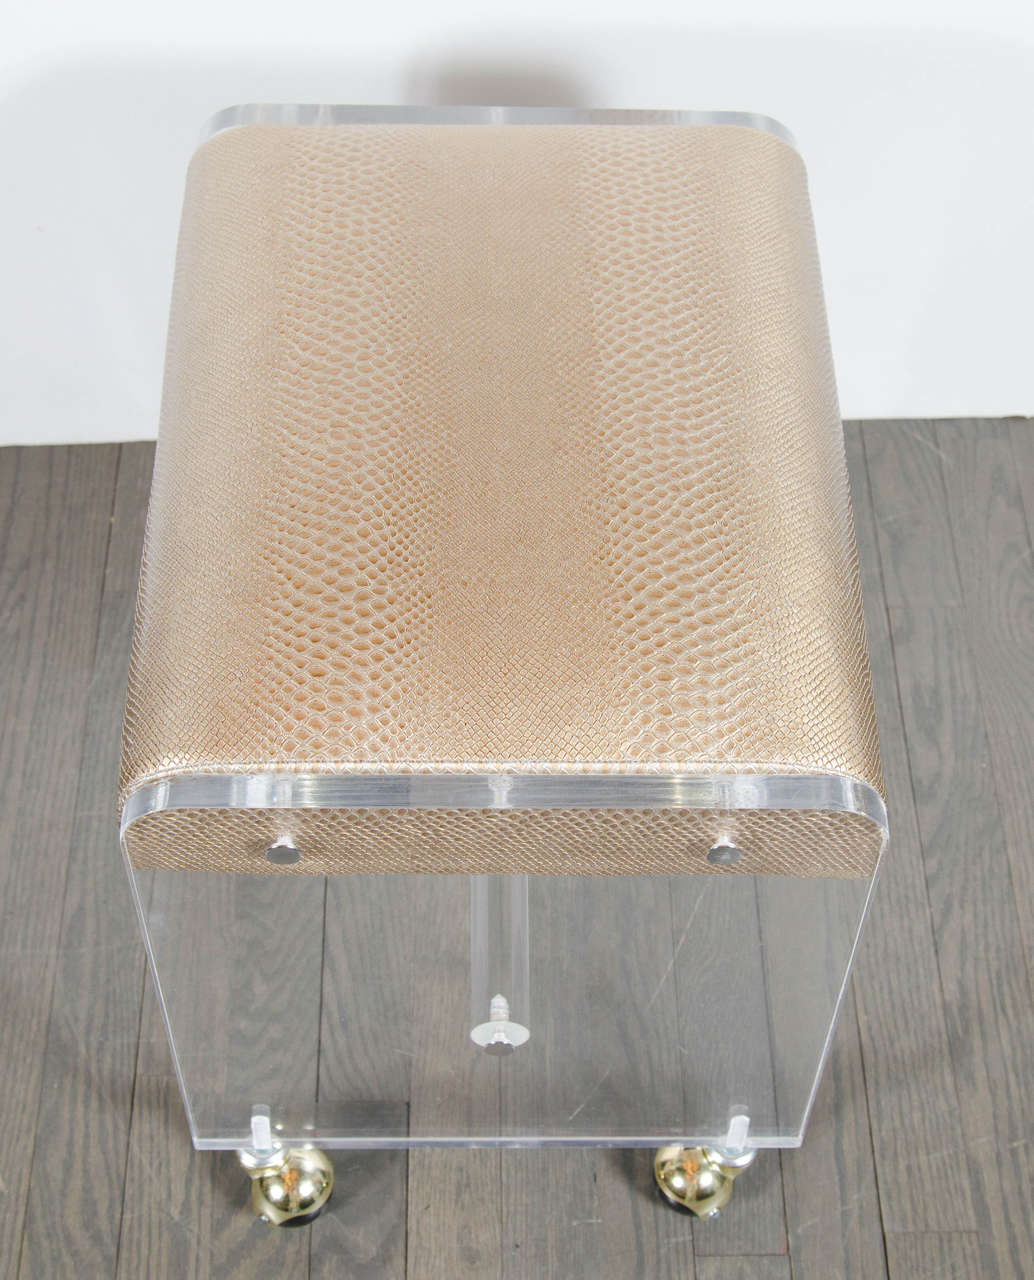 Late 20th Century Ultra Chic Mid-Century Modernist Lucite Stool with Faux Bronze Python Upholstery